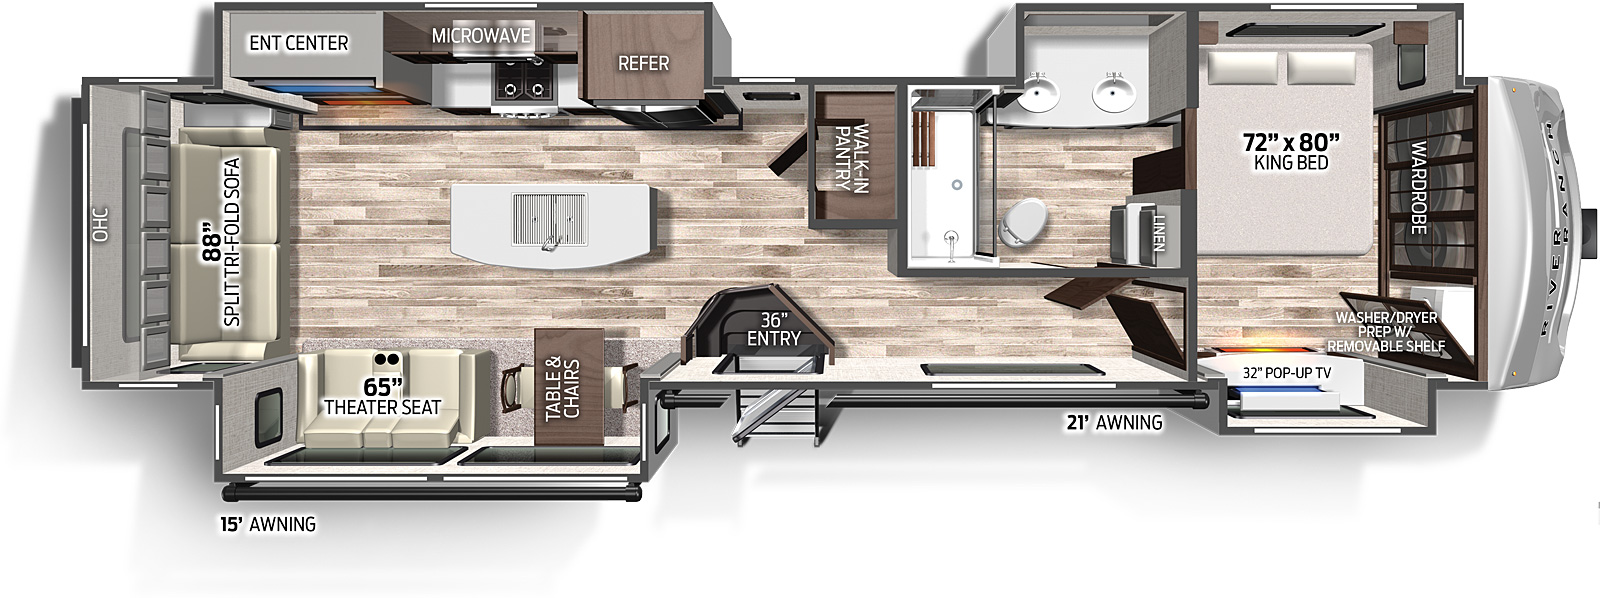 The 390RL has 4 slide outs, 3 on the road side and two on the camp side, along with one entry door on the camp side. Interior layout from front to back: front bedroom with king size bed in the road-side slide out, TV entertainment and dresser in the camp side slide out; side aisle bathroom with double sinks and vanity in the road-side slide out; kitchen with pantry and island with sink; fridge, oven and entertainment center in the roadside slide out, the dinette with free standing chairs and theater seating in the camp side slide out. 